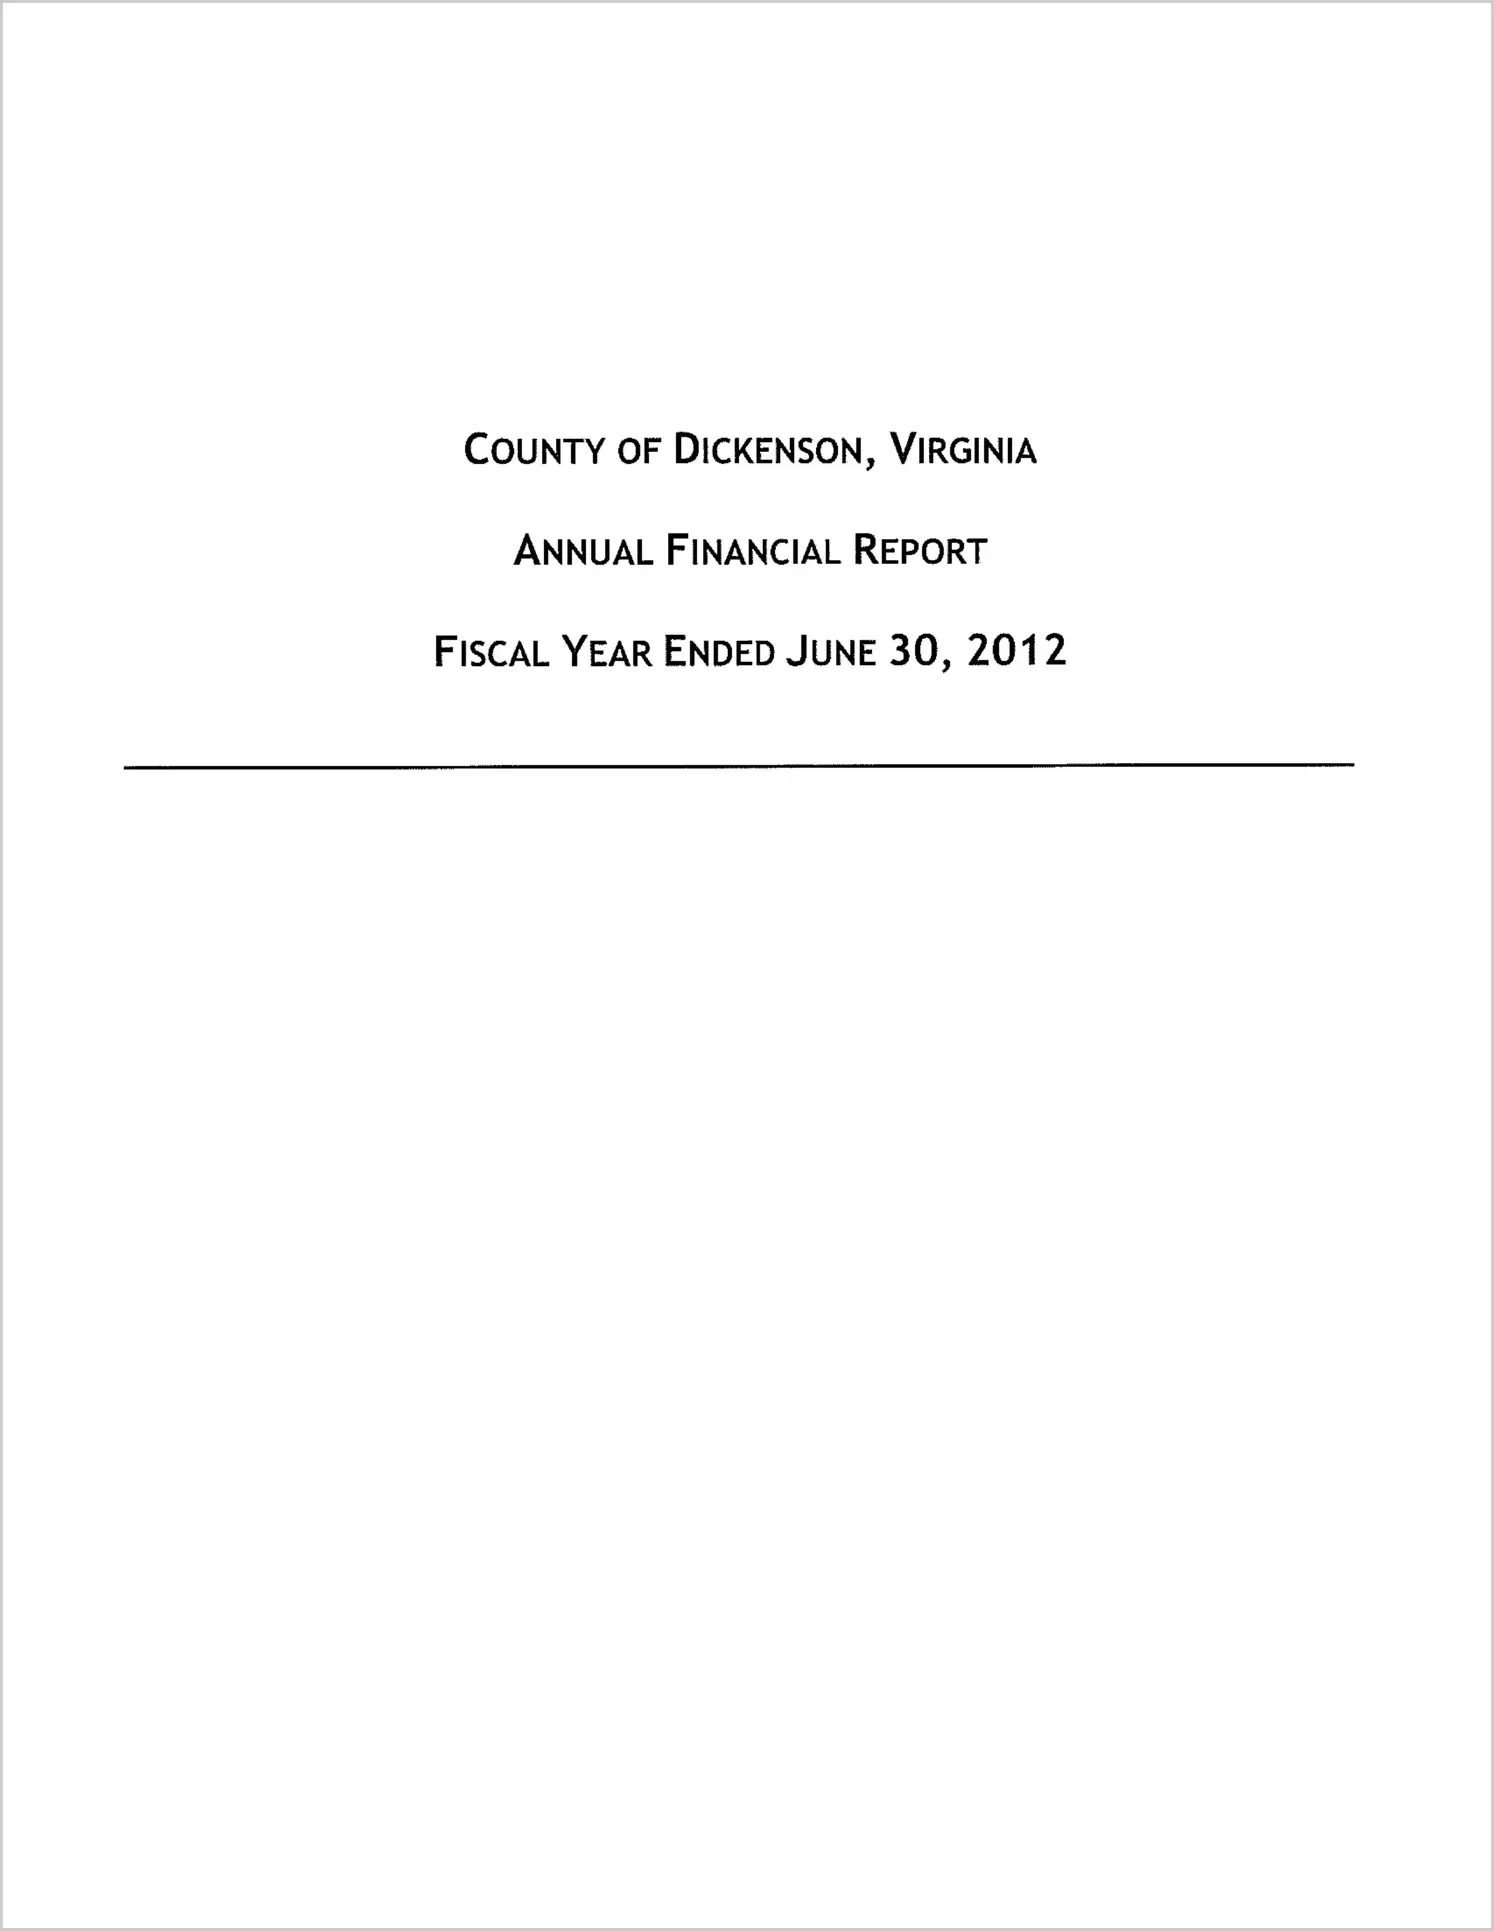 2012 Annual Financial Report for County of Dickenson